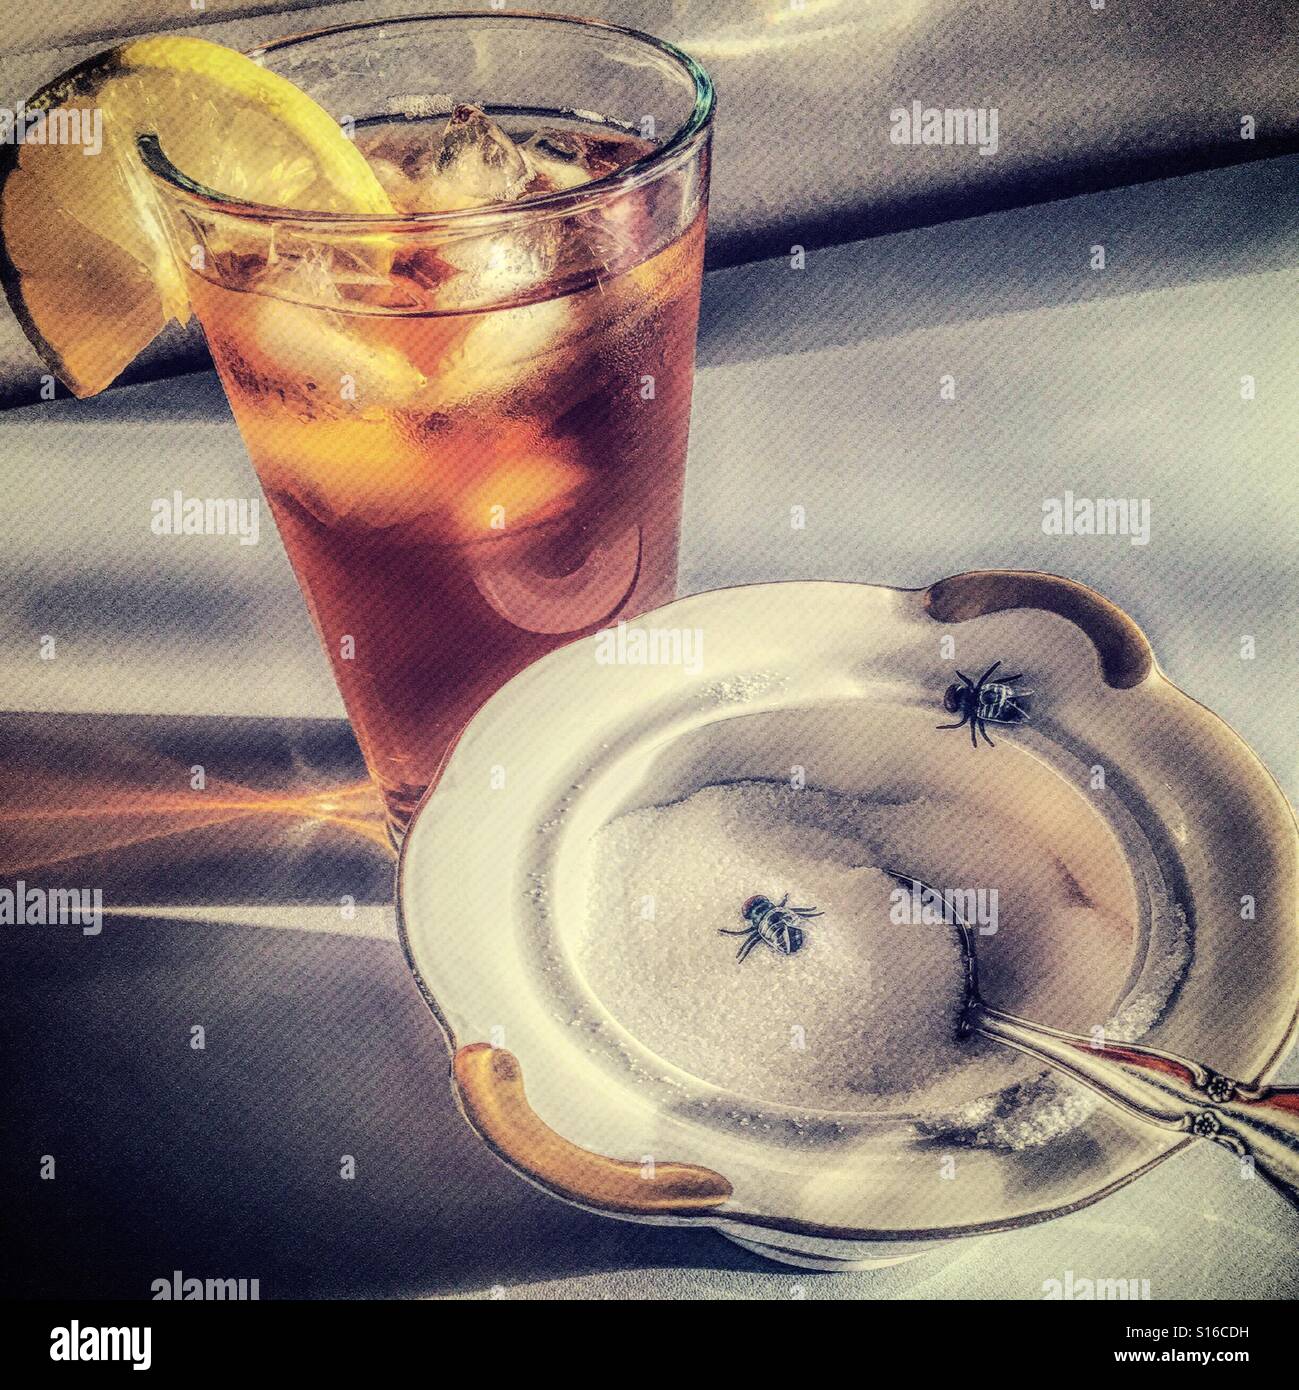 Sugar bowl with houseflies next to a glass of iced tea. Stock Photo